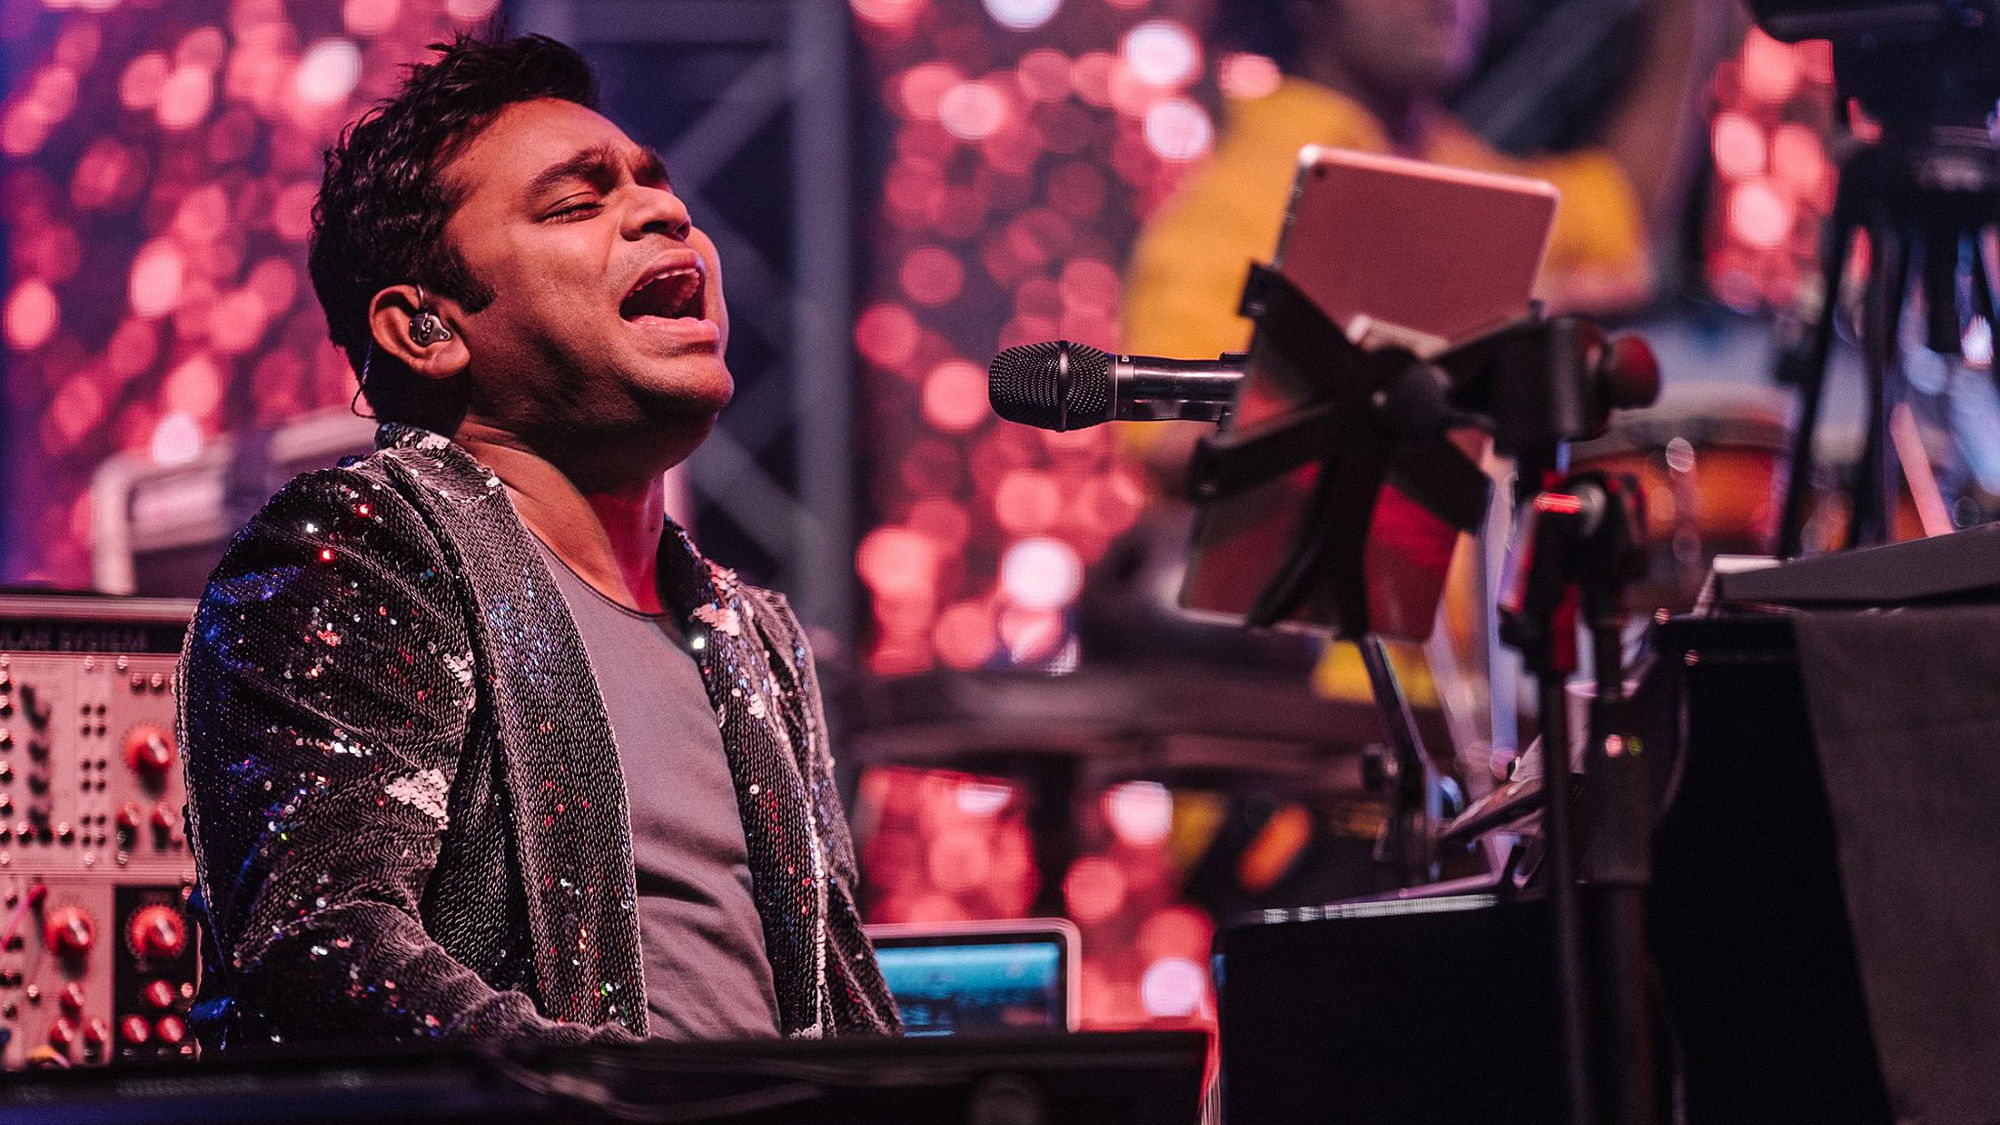 AR Rahman at the NH7 Weekender needed no introduction. (Photo Courtesy: <a href="https://www.facebook.com/nh7weekender/?fref=ts">Facebook/Bacardi NH7 Weekender</a>)